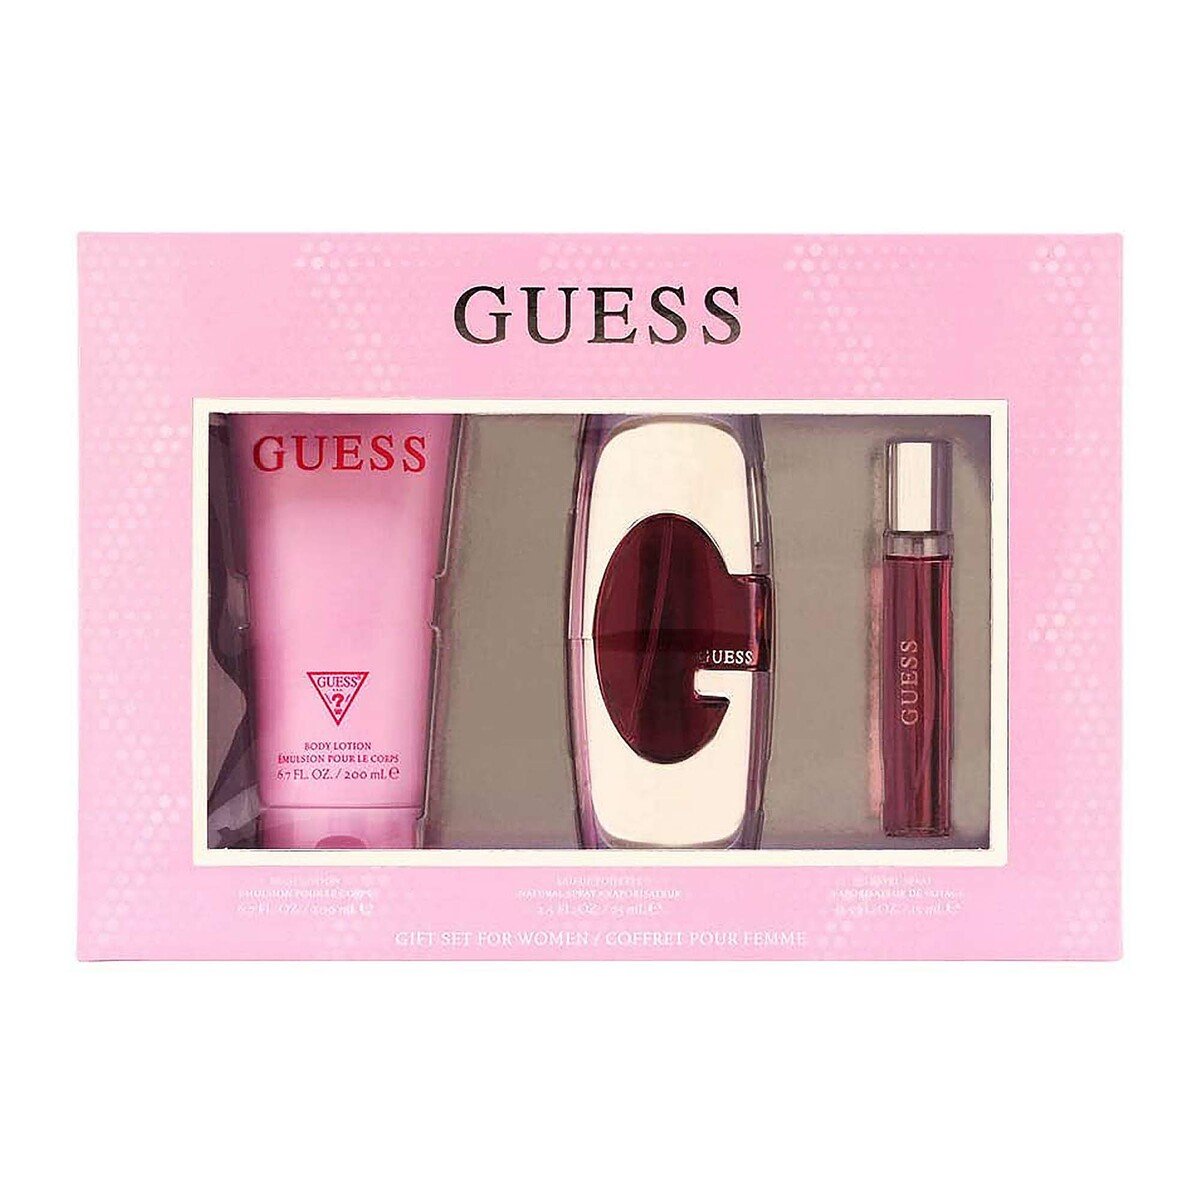 Guess Pink EDP for Women 75ml + Body Lotion 200ml + Travel Spray 15ml